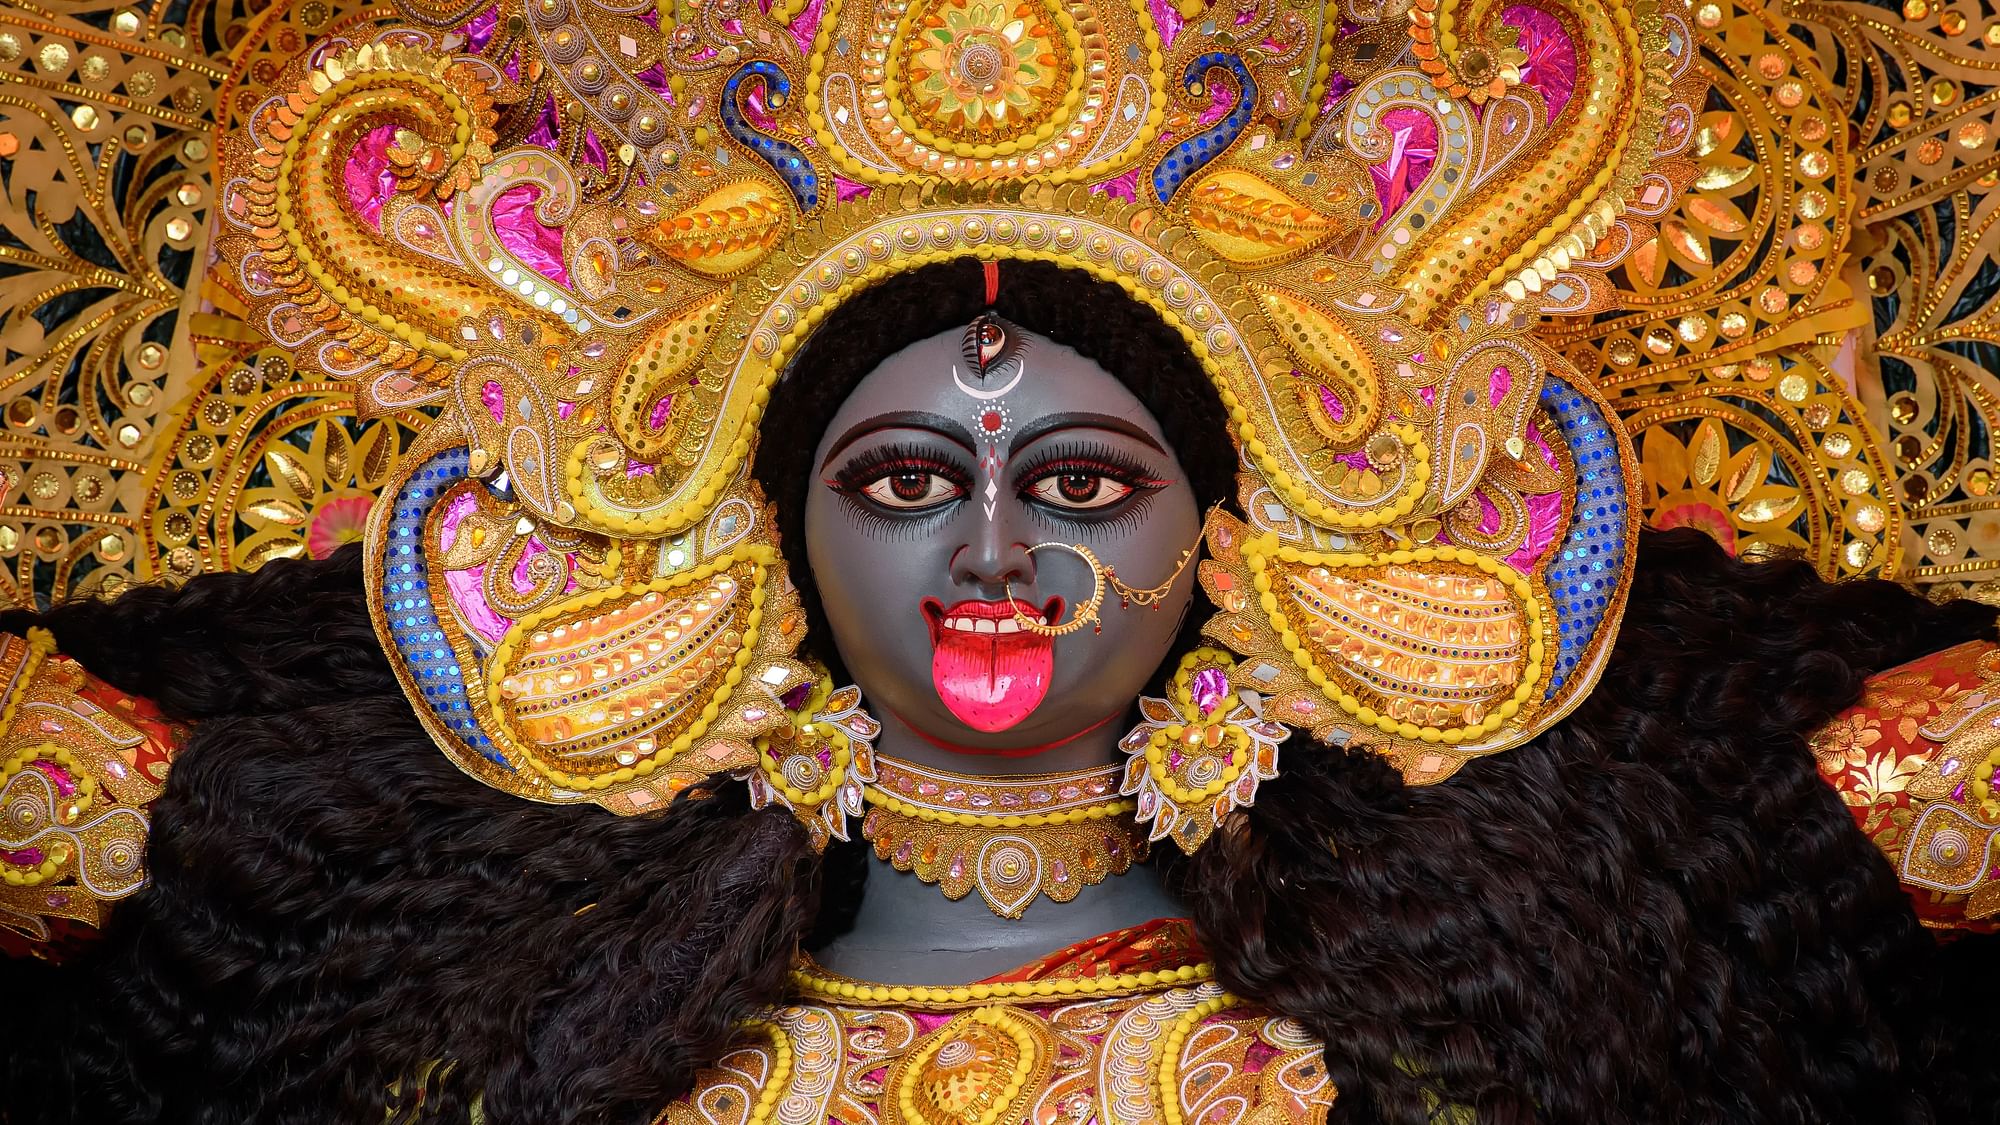 Happy Kali Puja 2022: Greetings, Wishes, Images, Posters, HD Wallpapers,  Texts, SMS, Kali Puja Wishes, Happy Kali Puja Messages, Goddess Kali Images